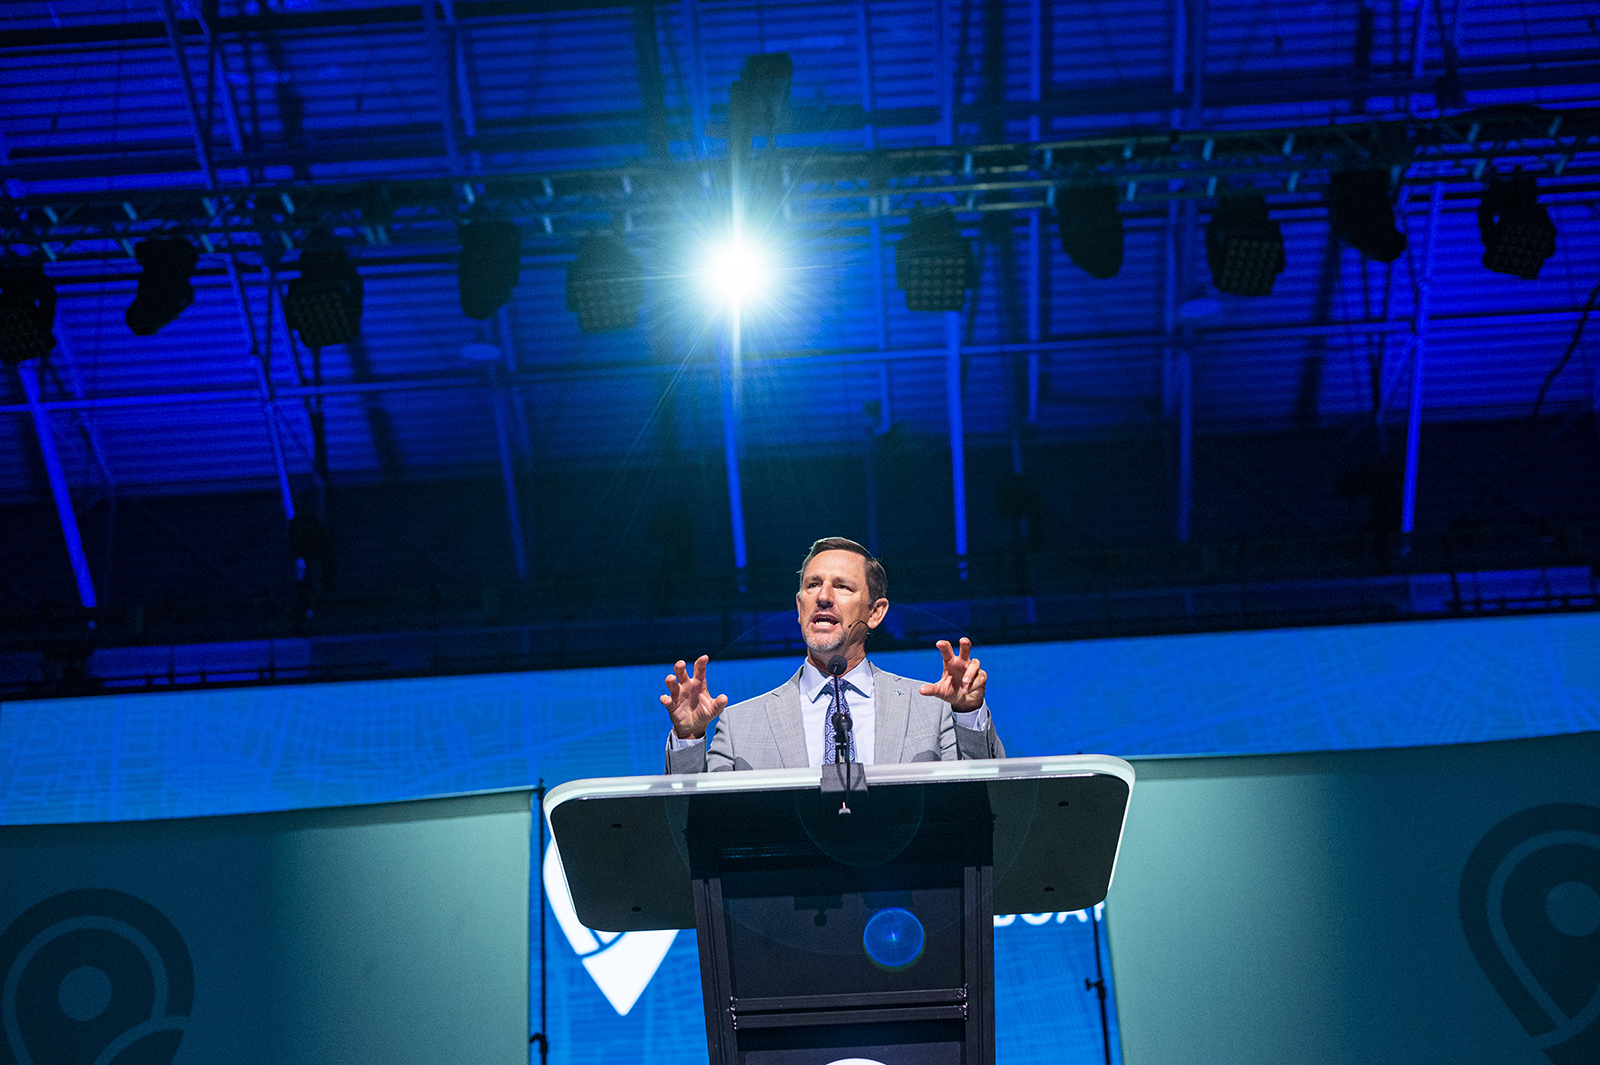 International Mission Board president Paul Chitwood speaks during the first day of the Southern Baptist Convention annual meeting at the Ernest N. Morial Convention Center in New Orleans, La., on June 13, 2023. RNS photo by Emily Kask